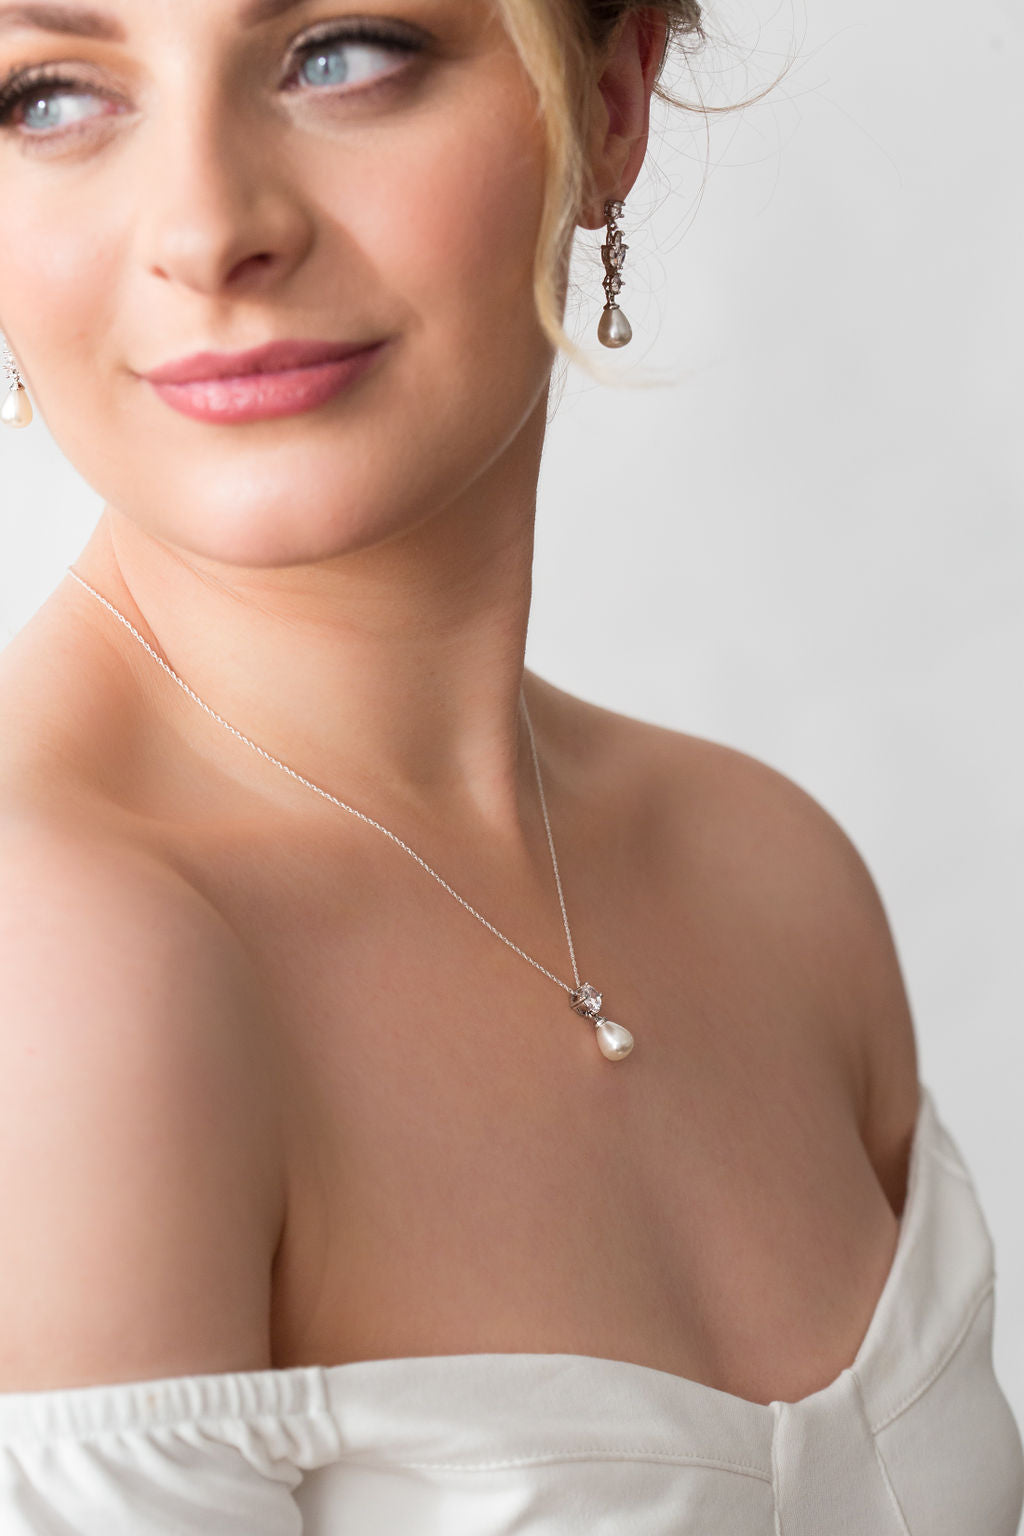 The Timeless Beauty of Pearls for Your Bridal Jewellery and Hair Accessories